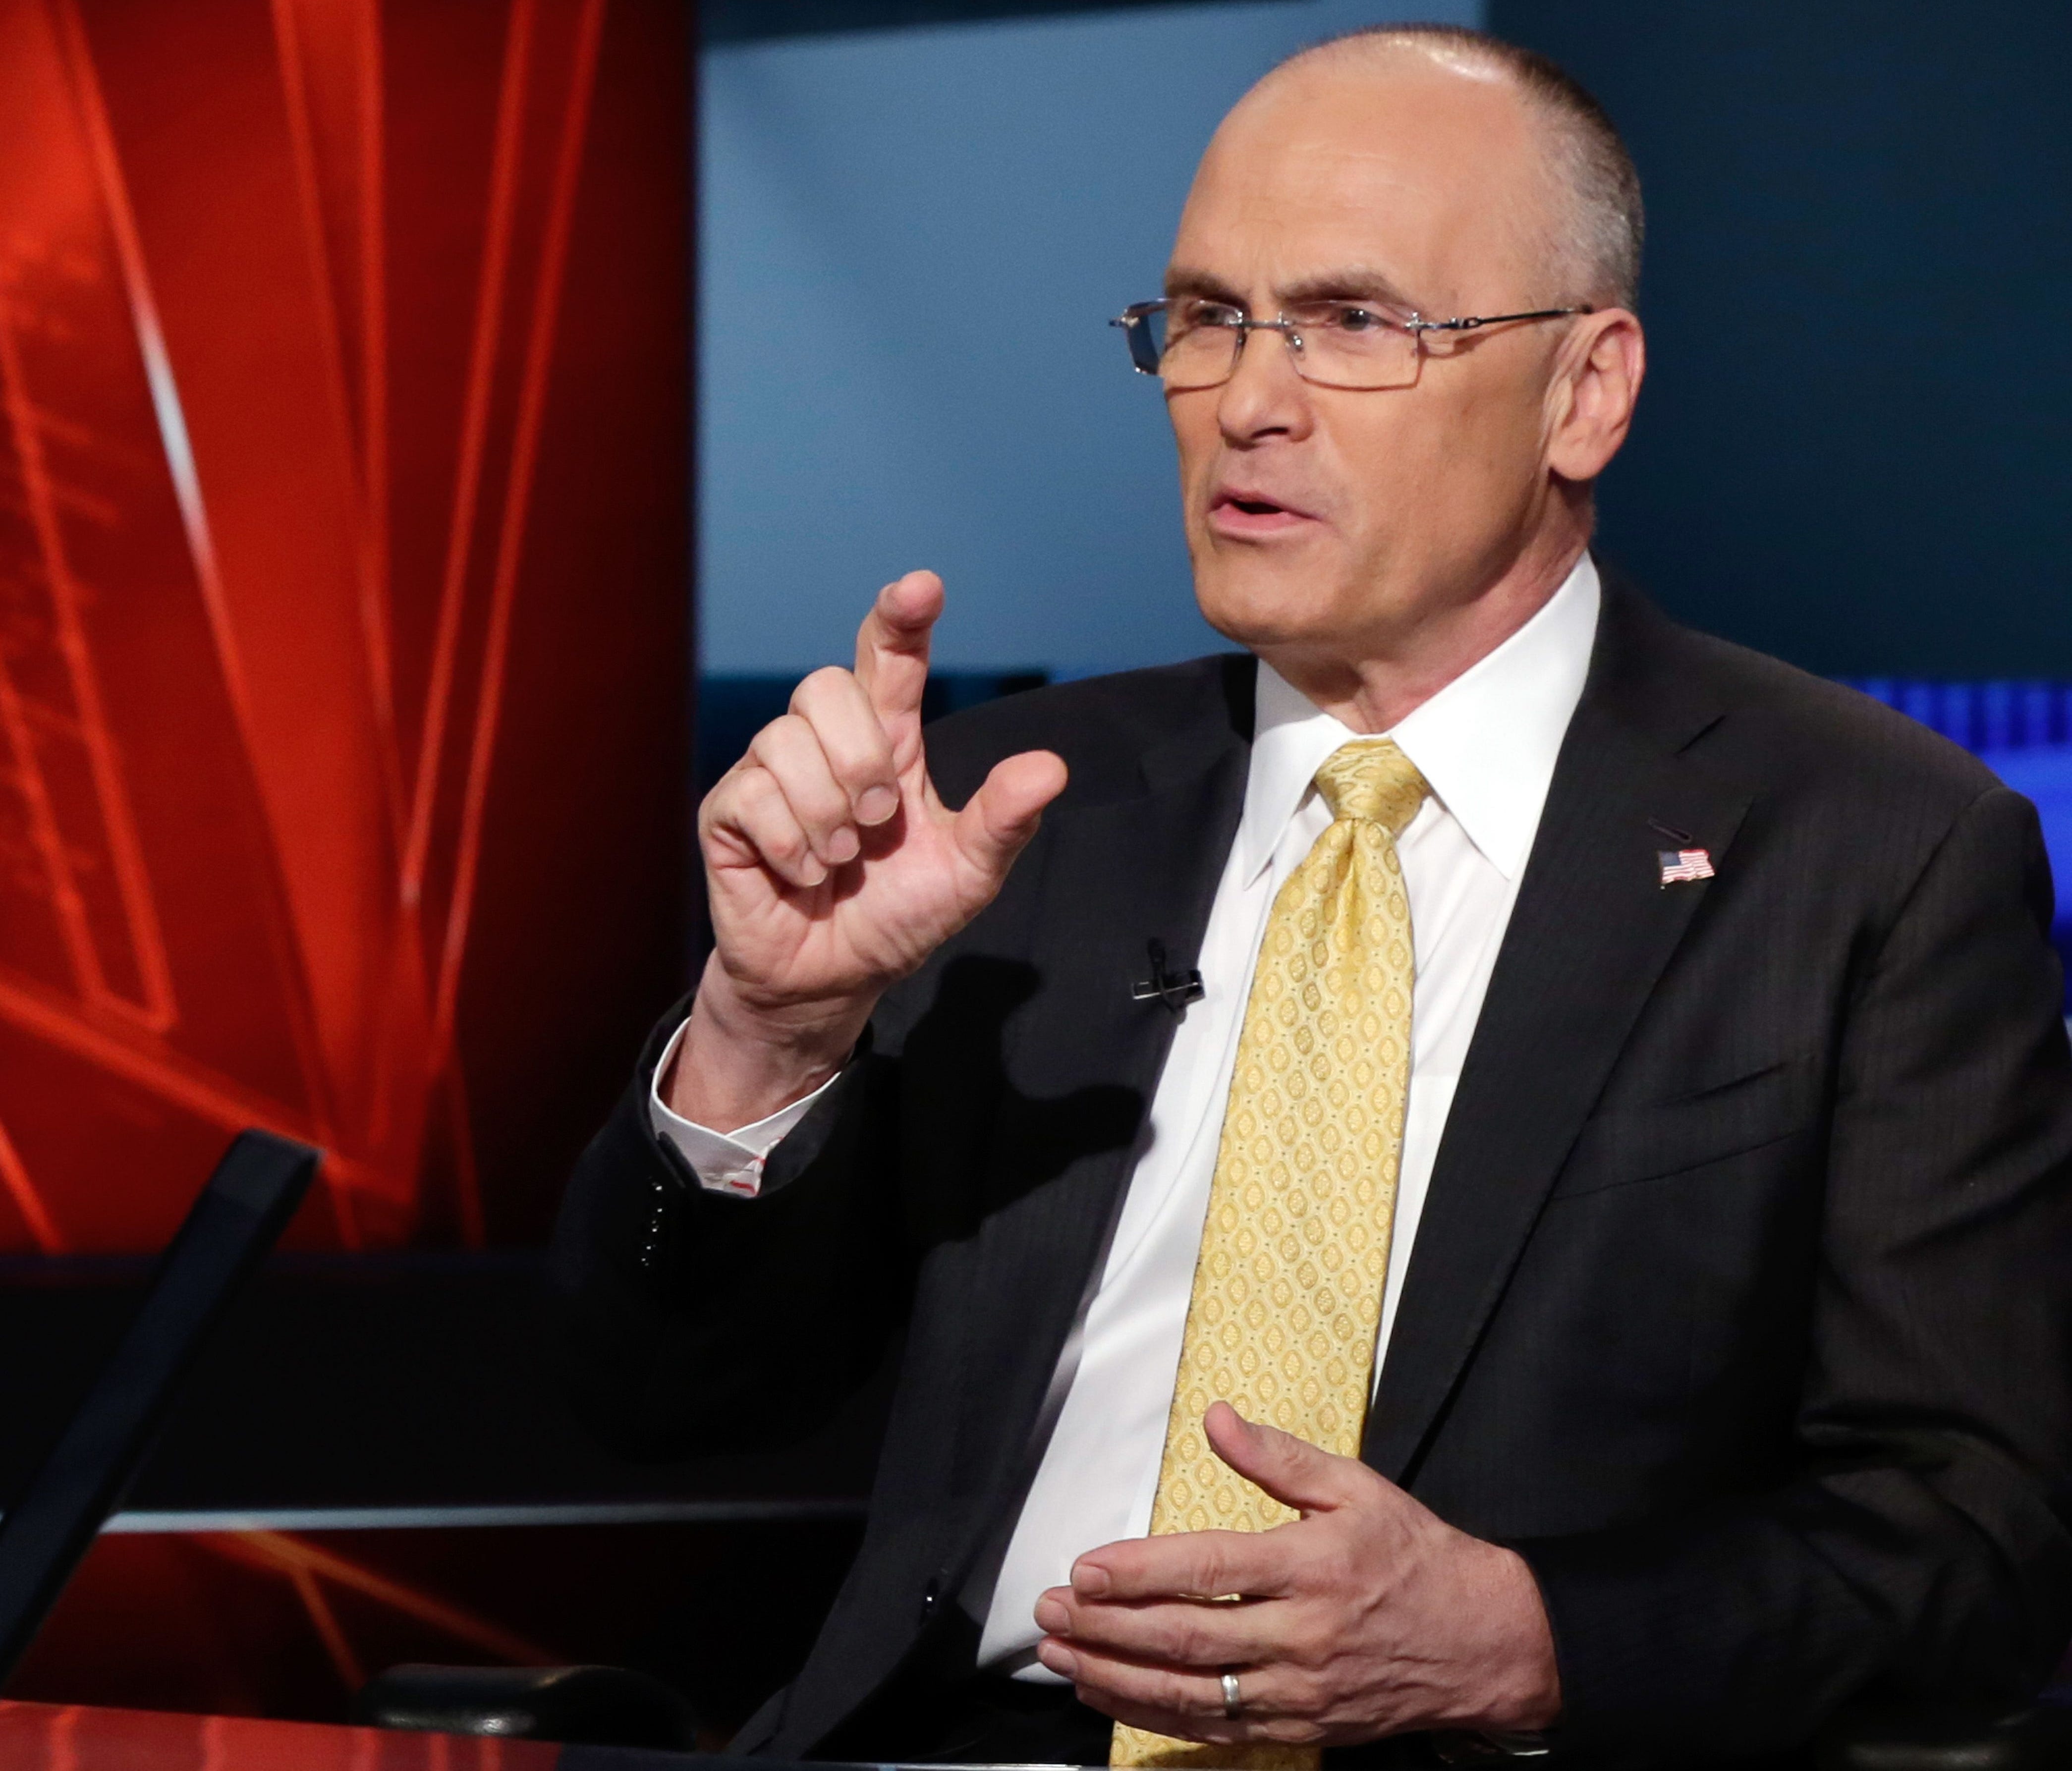 Andrew Puzder, CEO of CKE Restaurants, who was nominated by President-elect Donald Trump to be United States Secretary of Labor, is interviewed by anchor Neil Cavuto during his 